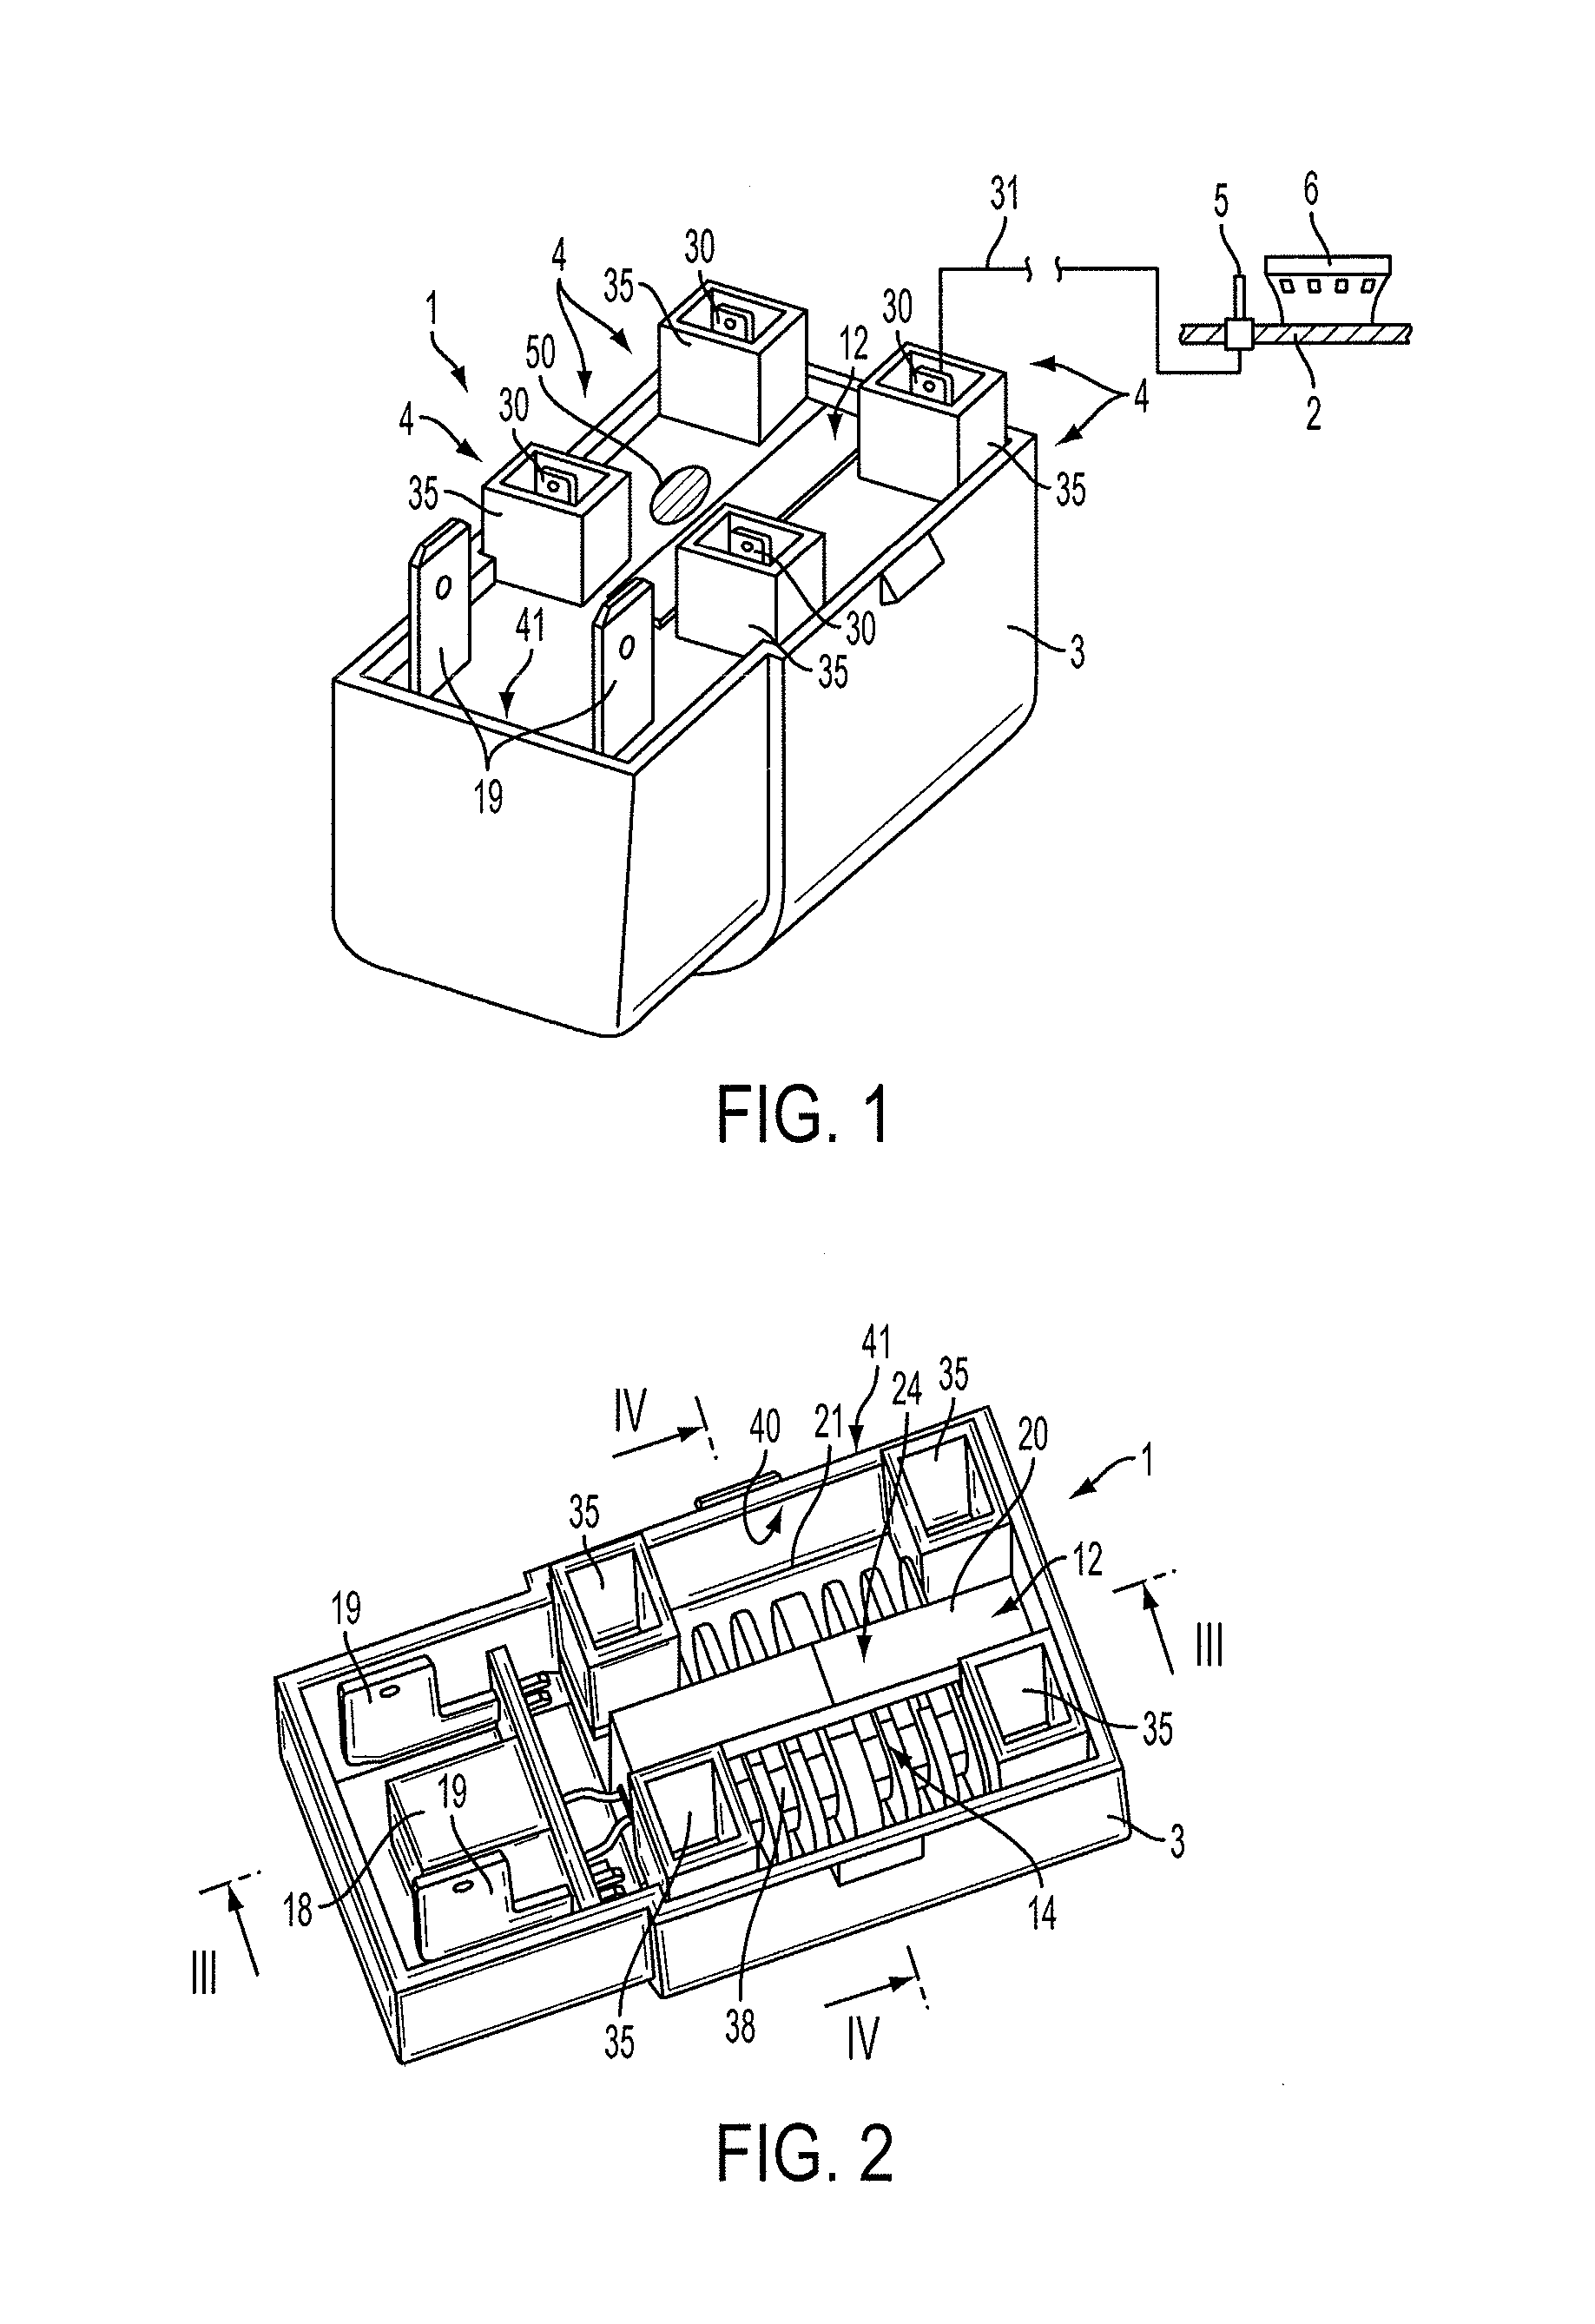 High efficiency gas lighting device for an electric household appliance